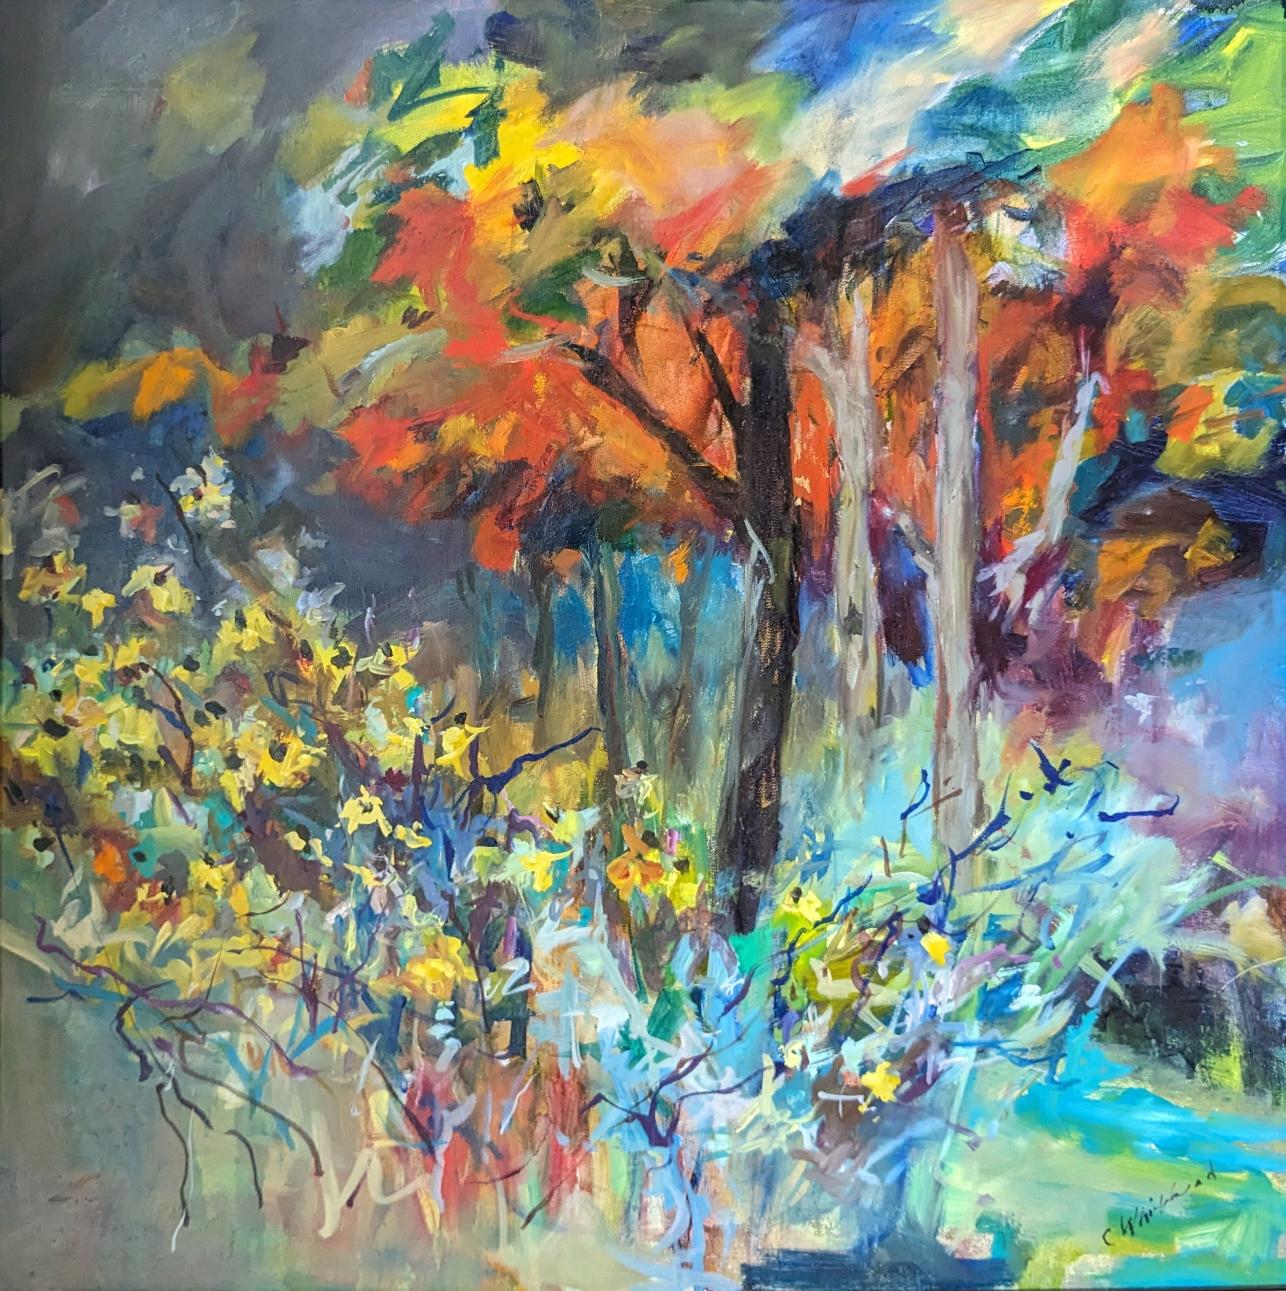 A plein air painting of trees and flowers by Catherine Whitehead